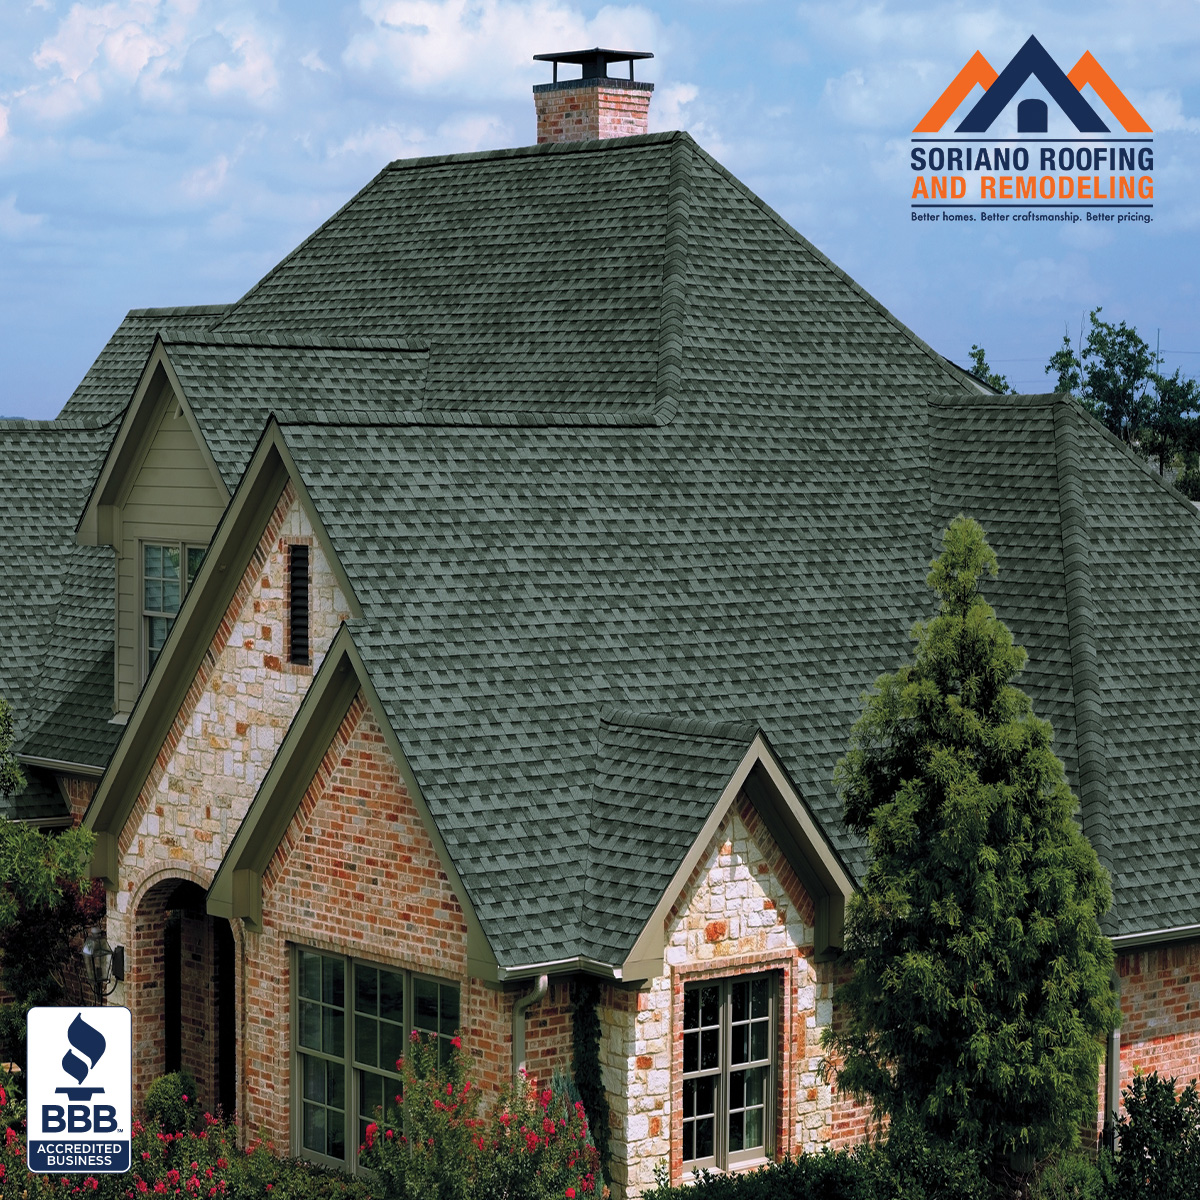 SORIANO ROOFING AND REMODELING